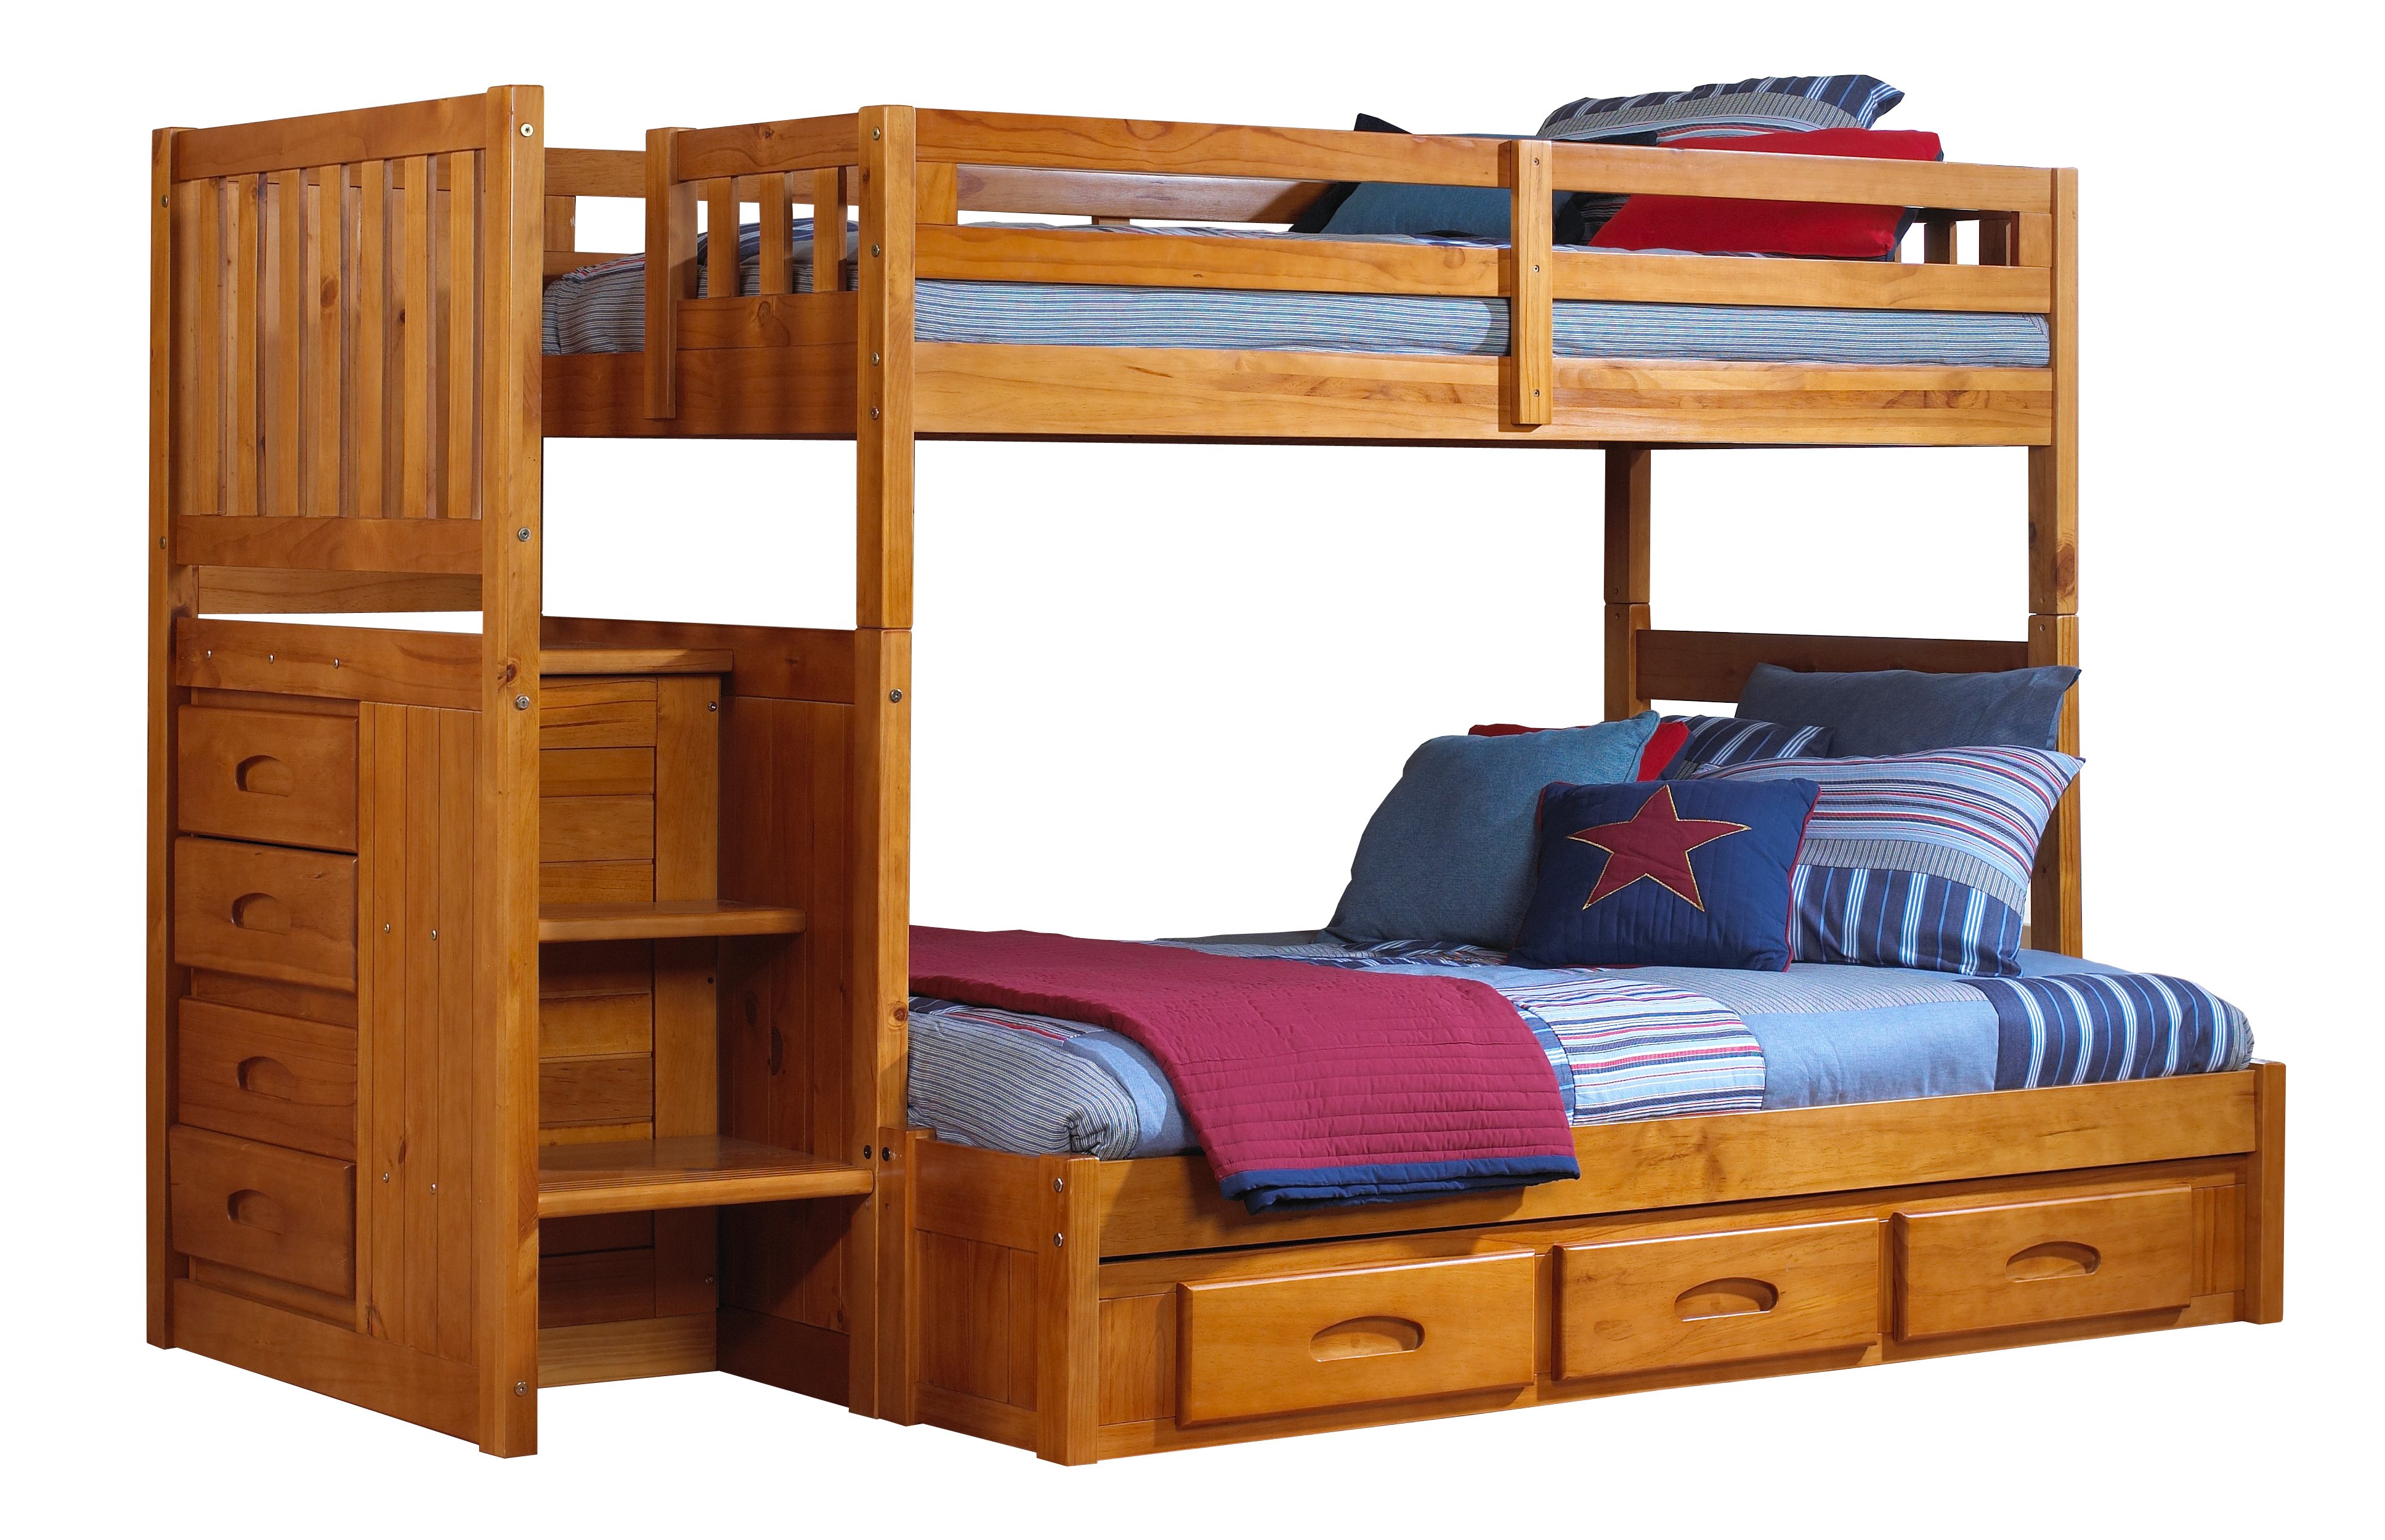 Honey Staircase Bunk Bed, Twin Over Twin Bunk Bed With Stairs